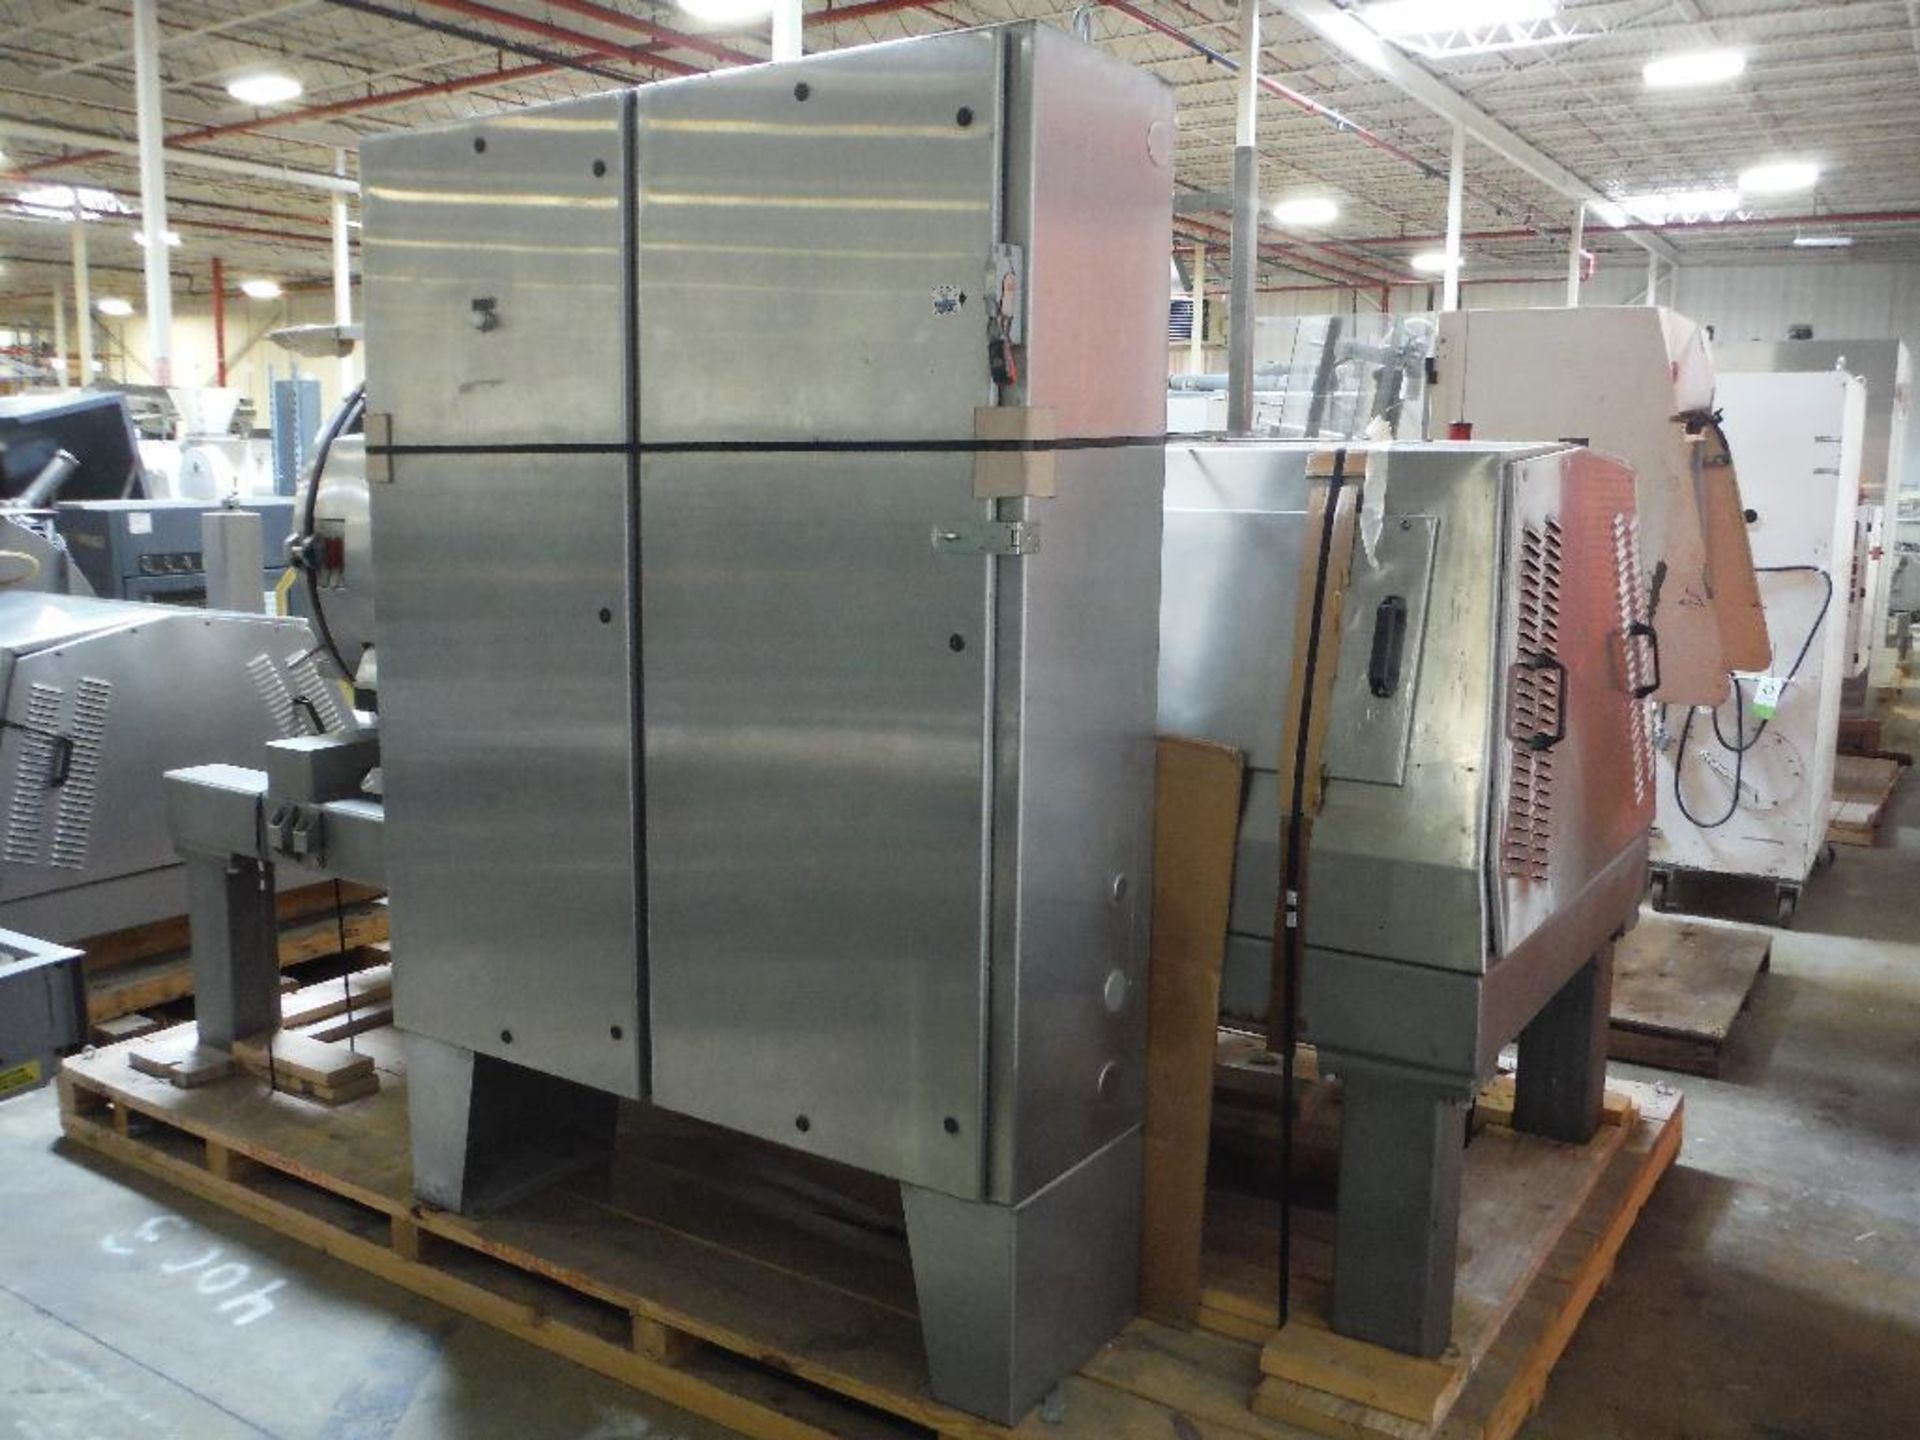 Stephan high speed jacketed mixer, Model TK_600, SN 714583, 43 in. bowl diameter x 26 in. deep, with - Image 15 of 29